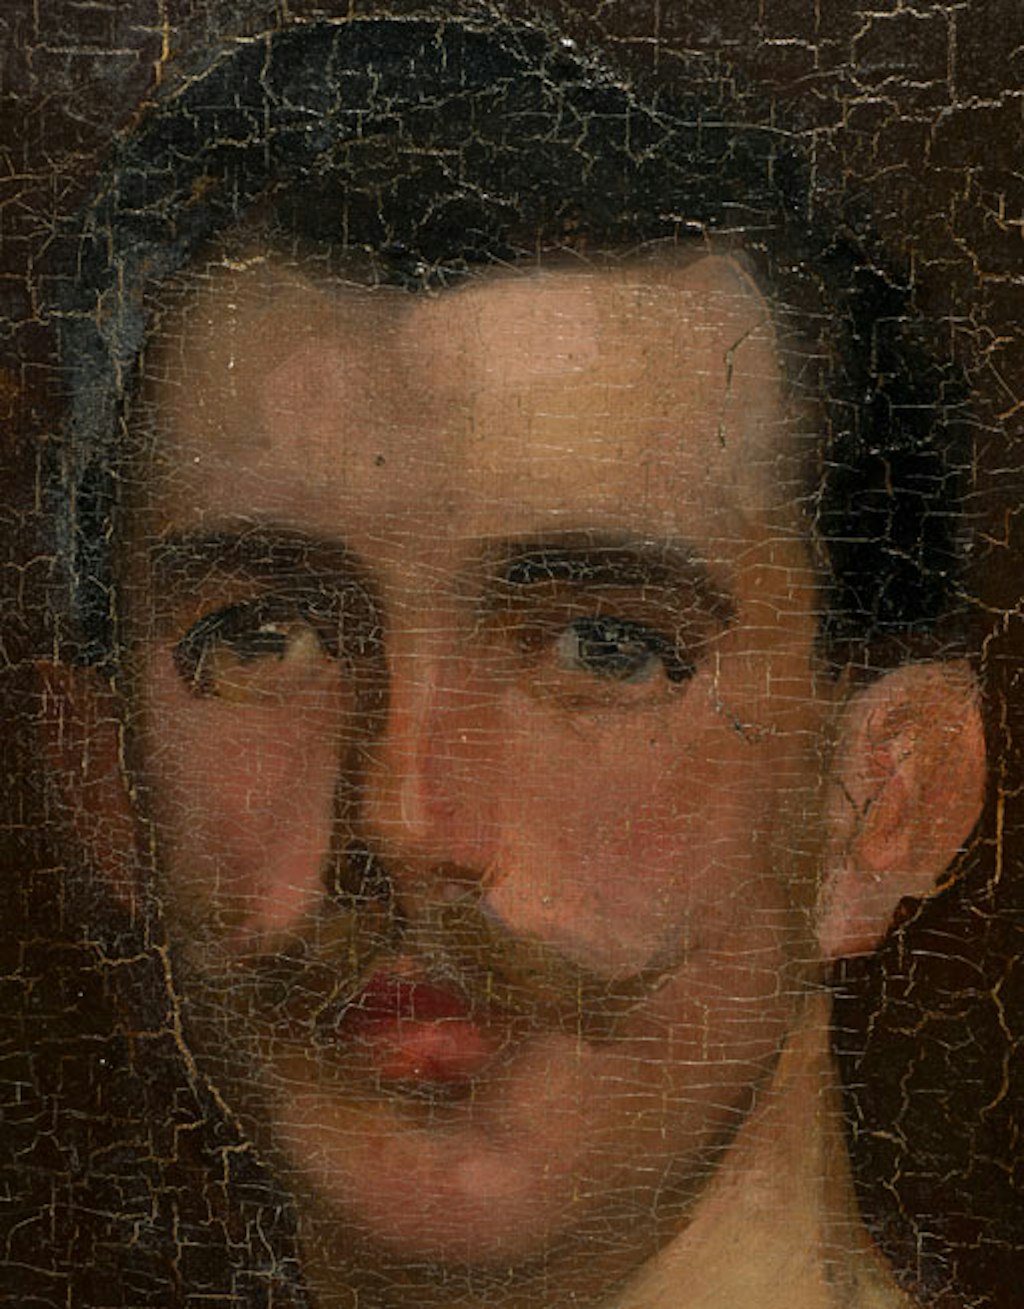 A multitude of fine cracks on a painting of person's head.